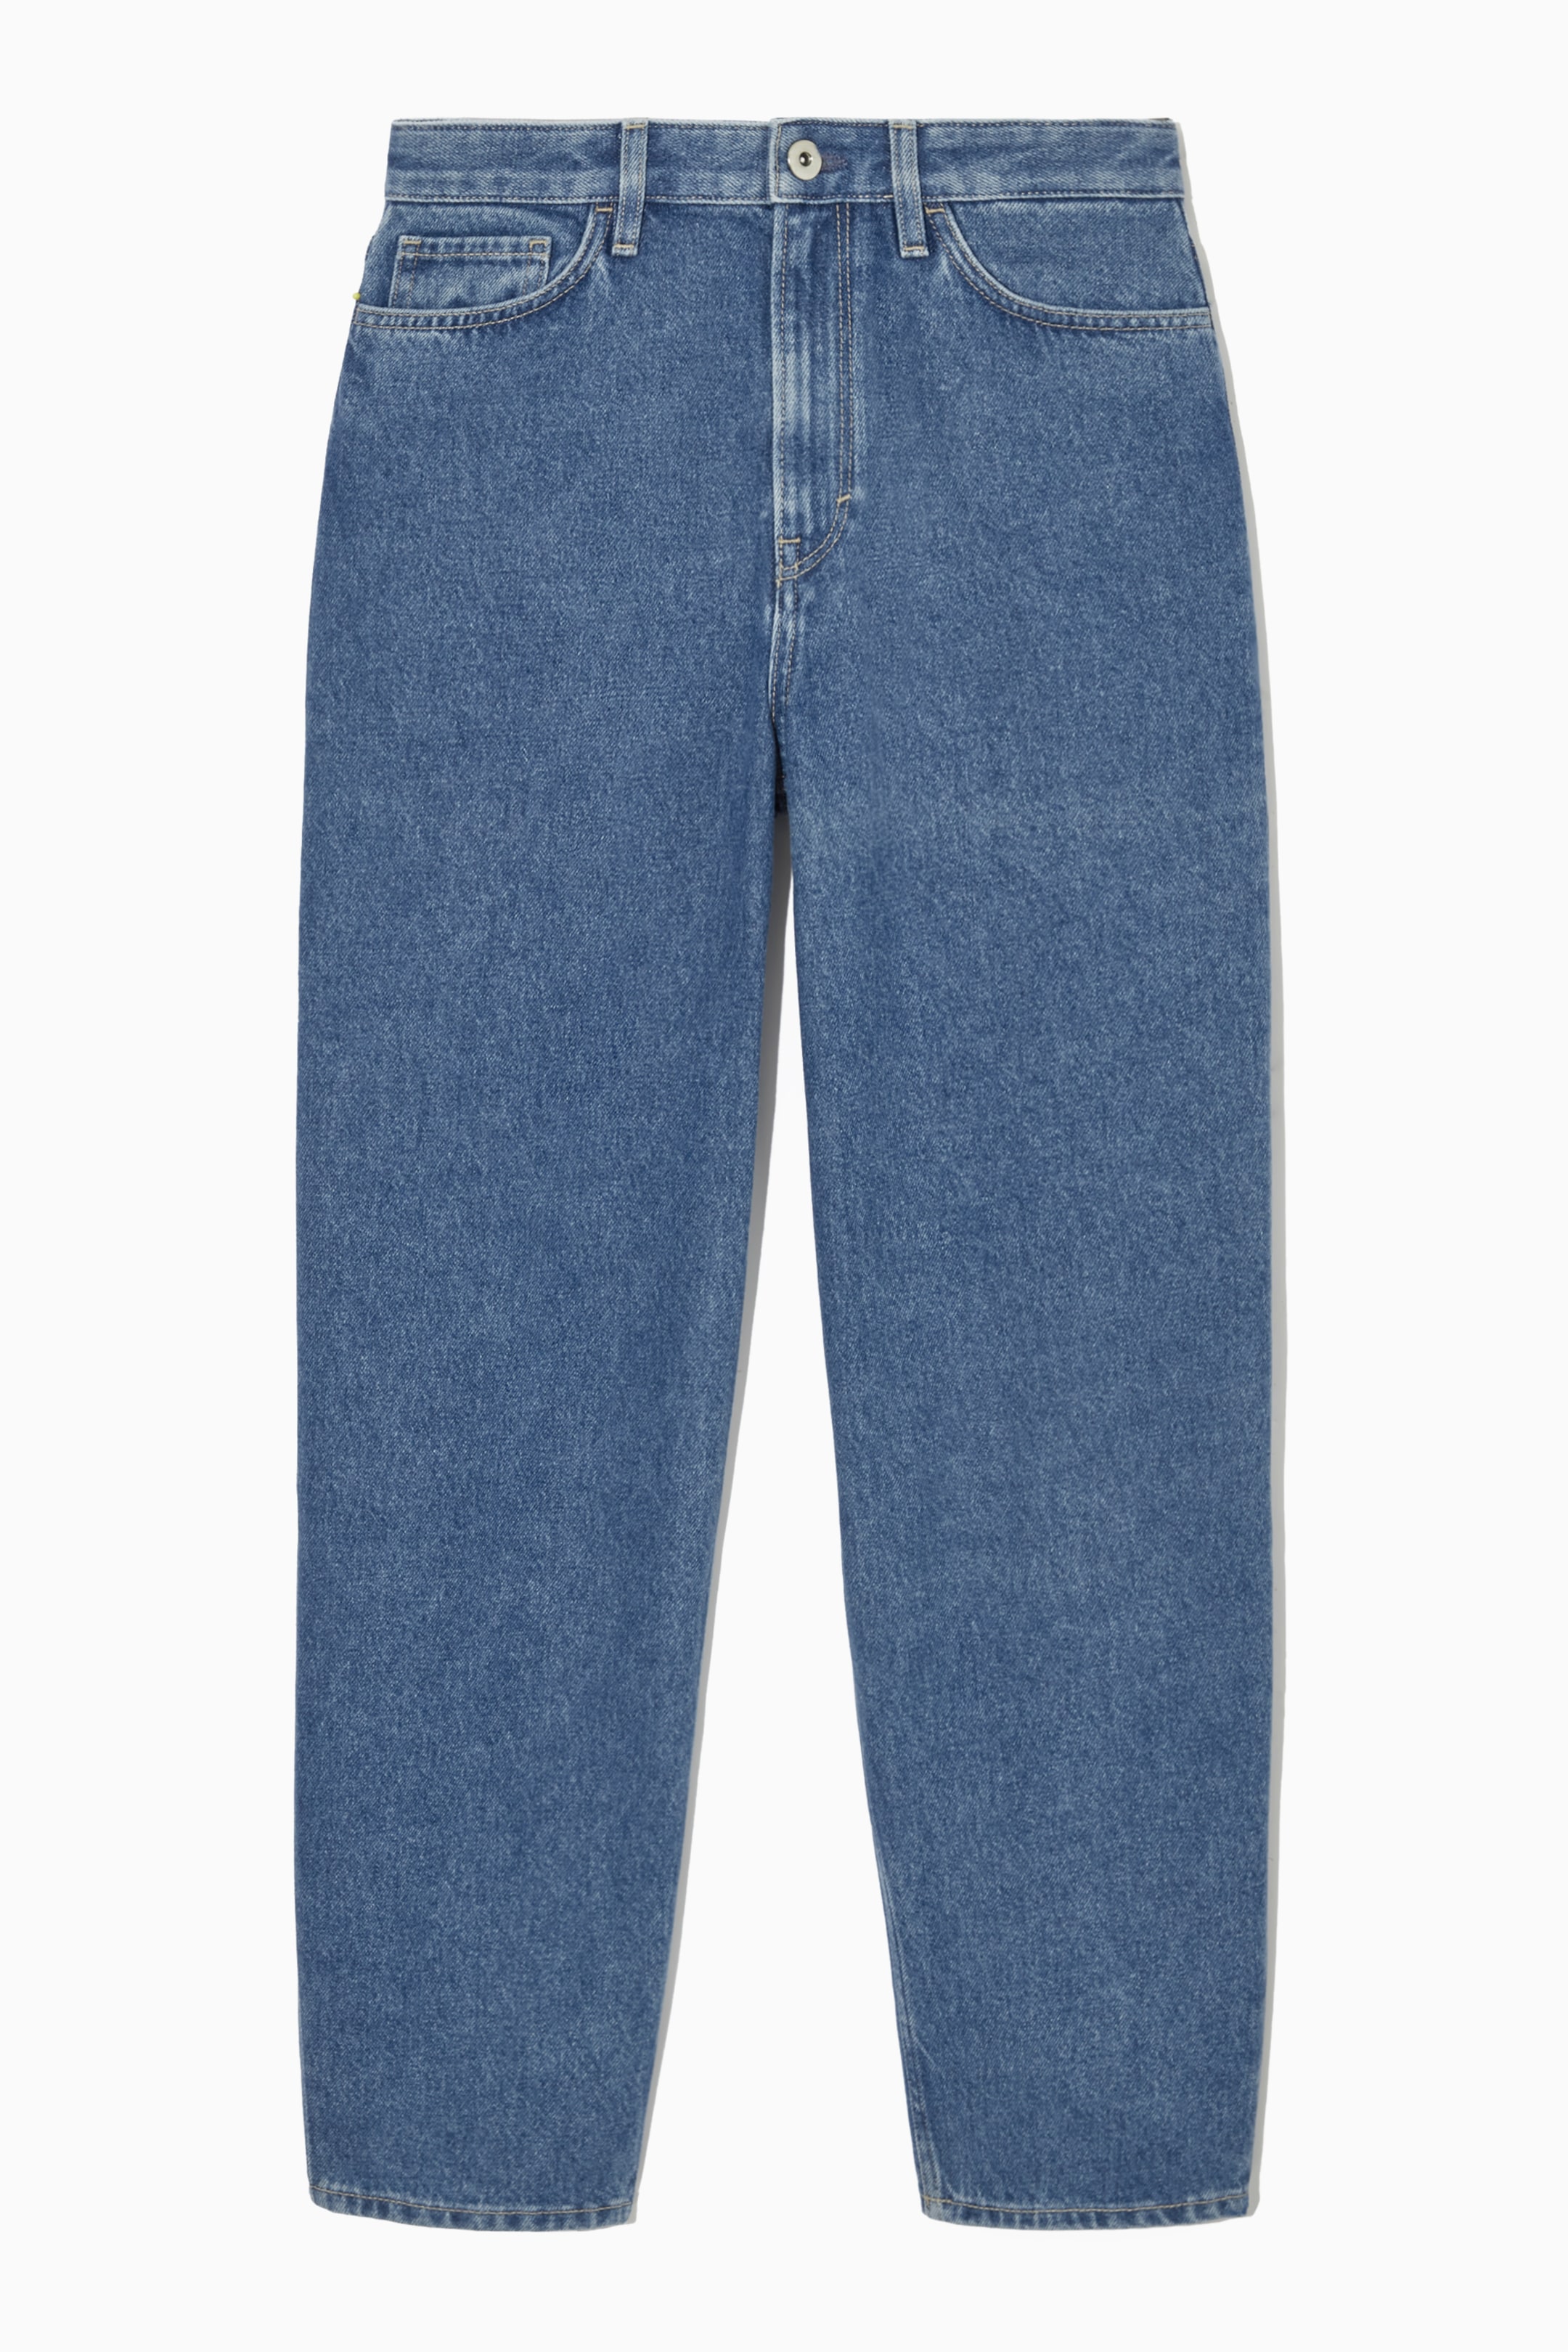 Arch jeans - tapered - MEDIUM BLUE - women | COS AU